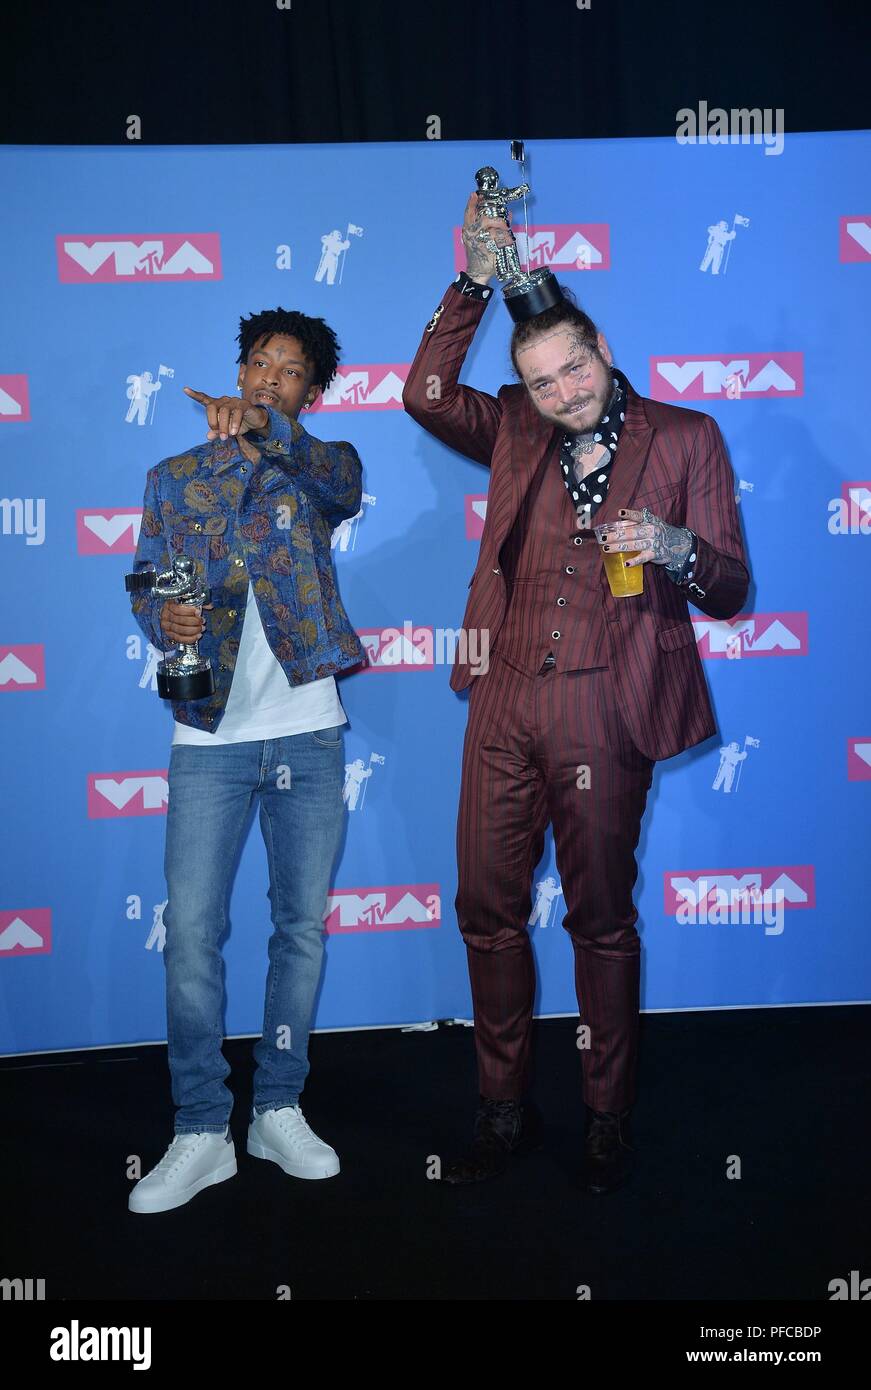 New York, NY, USA. 20th Aug, 2018. 21 Savage, Post Malone at arrivals for  2018 MTV VMAs - Arrivals Part 3, Radio City Music Hall, New York, NY August  20, 2018. Credit: